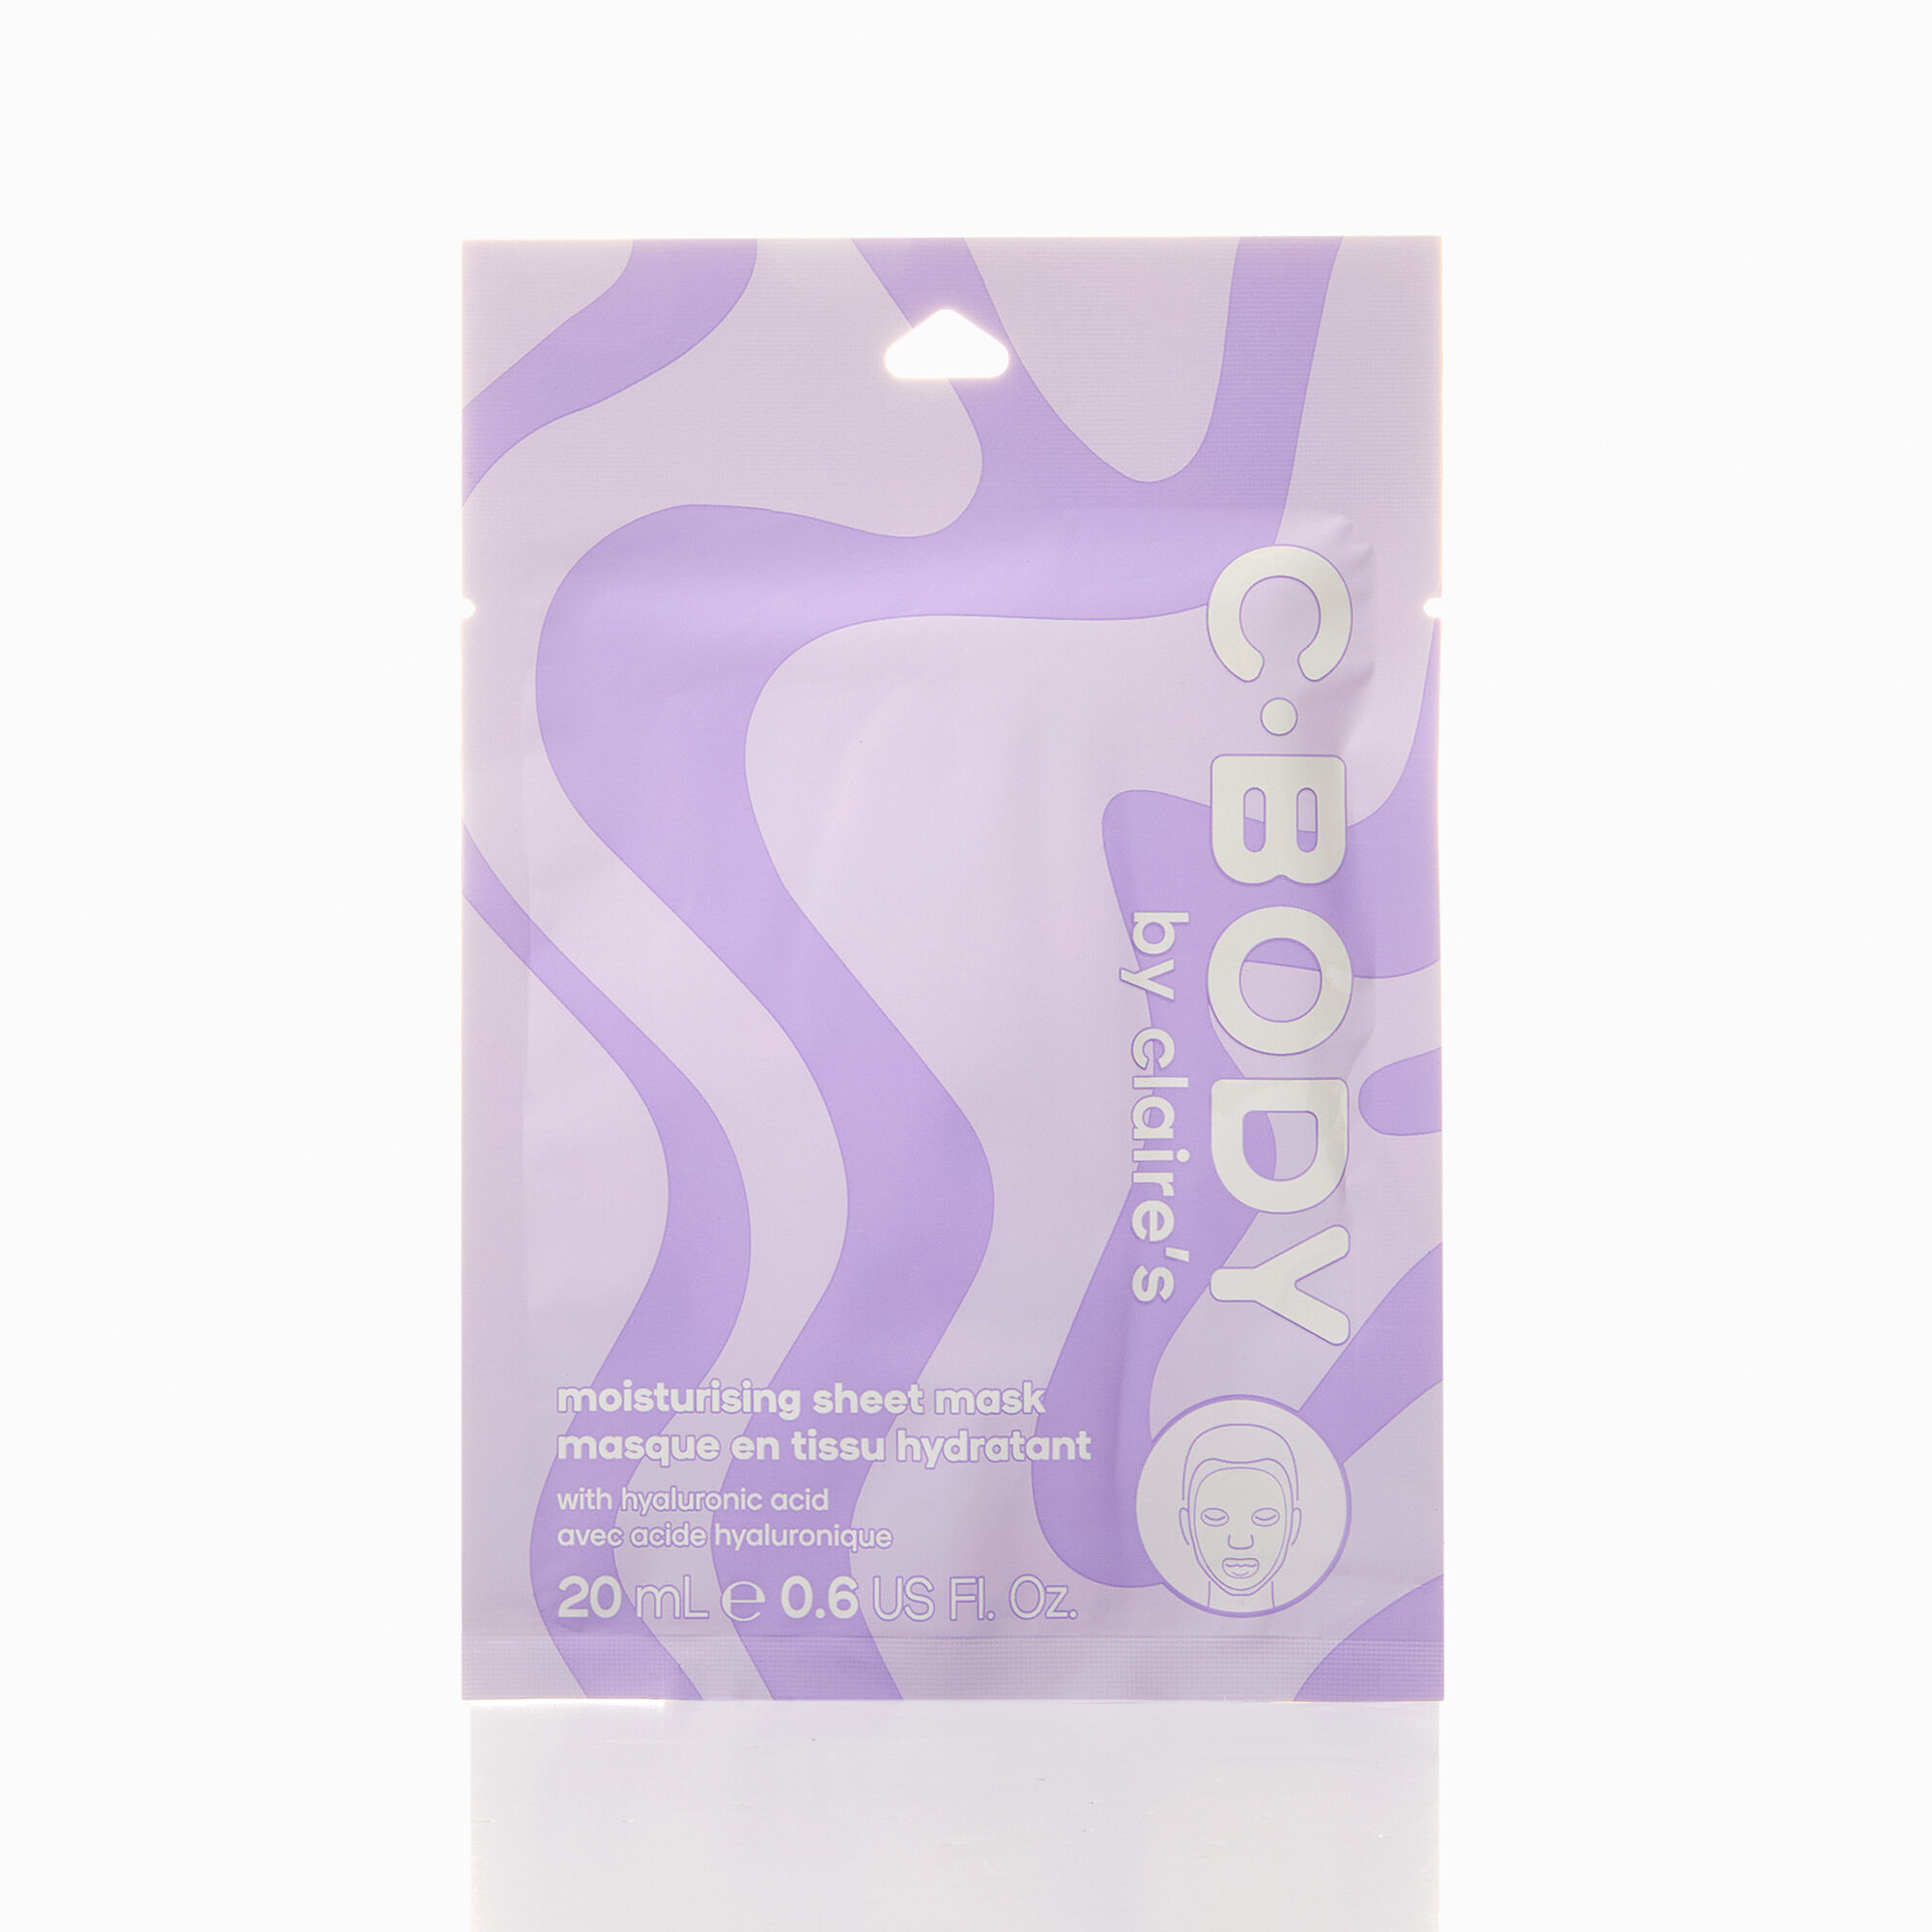 View Cbody By Claires Moisturizing Sheet Mask information